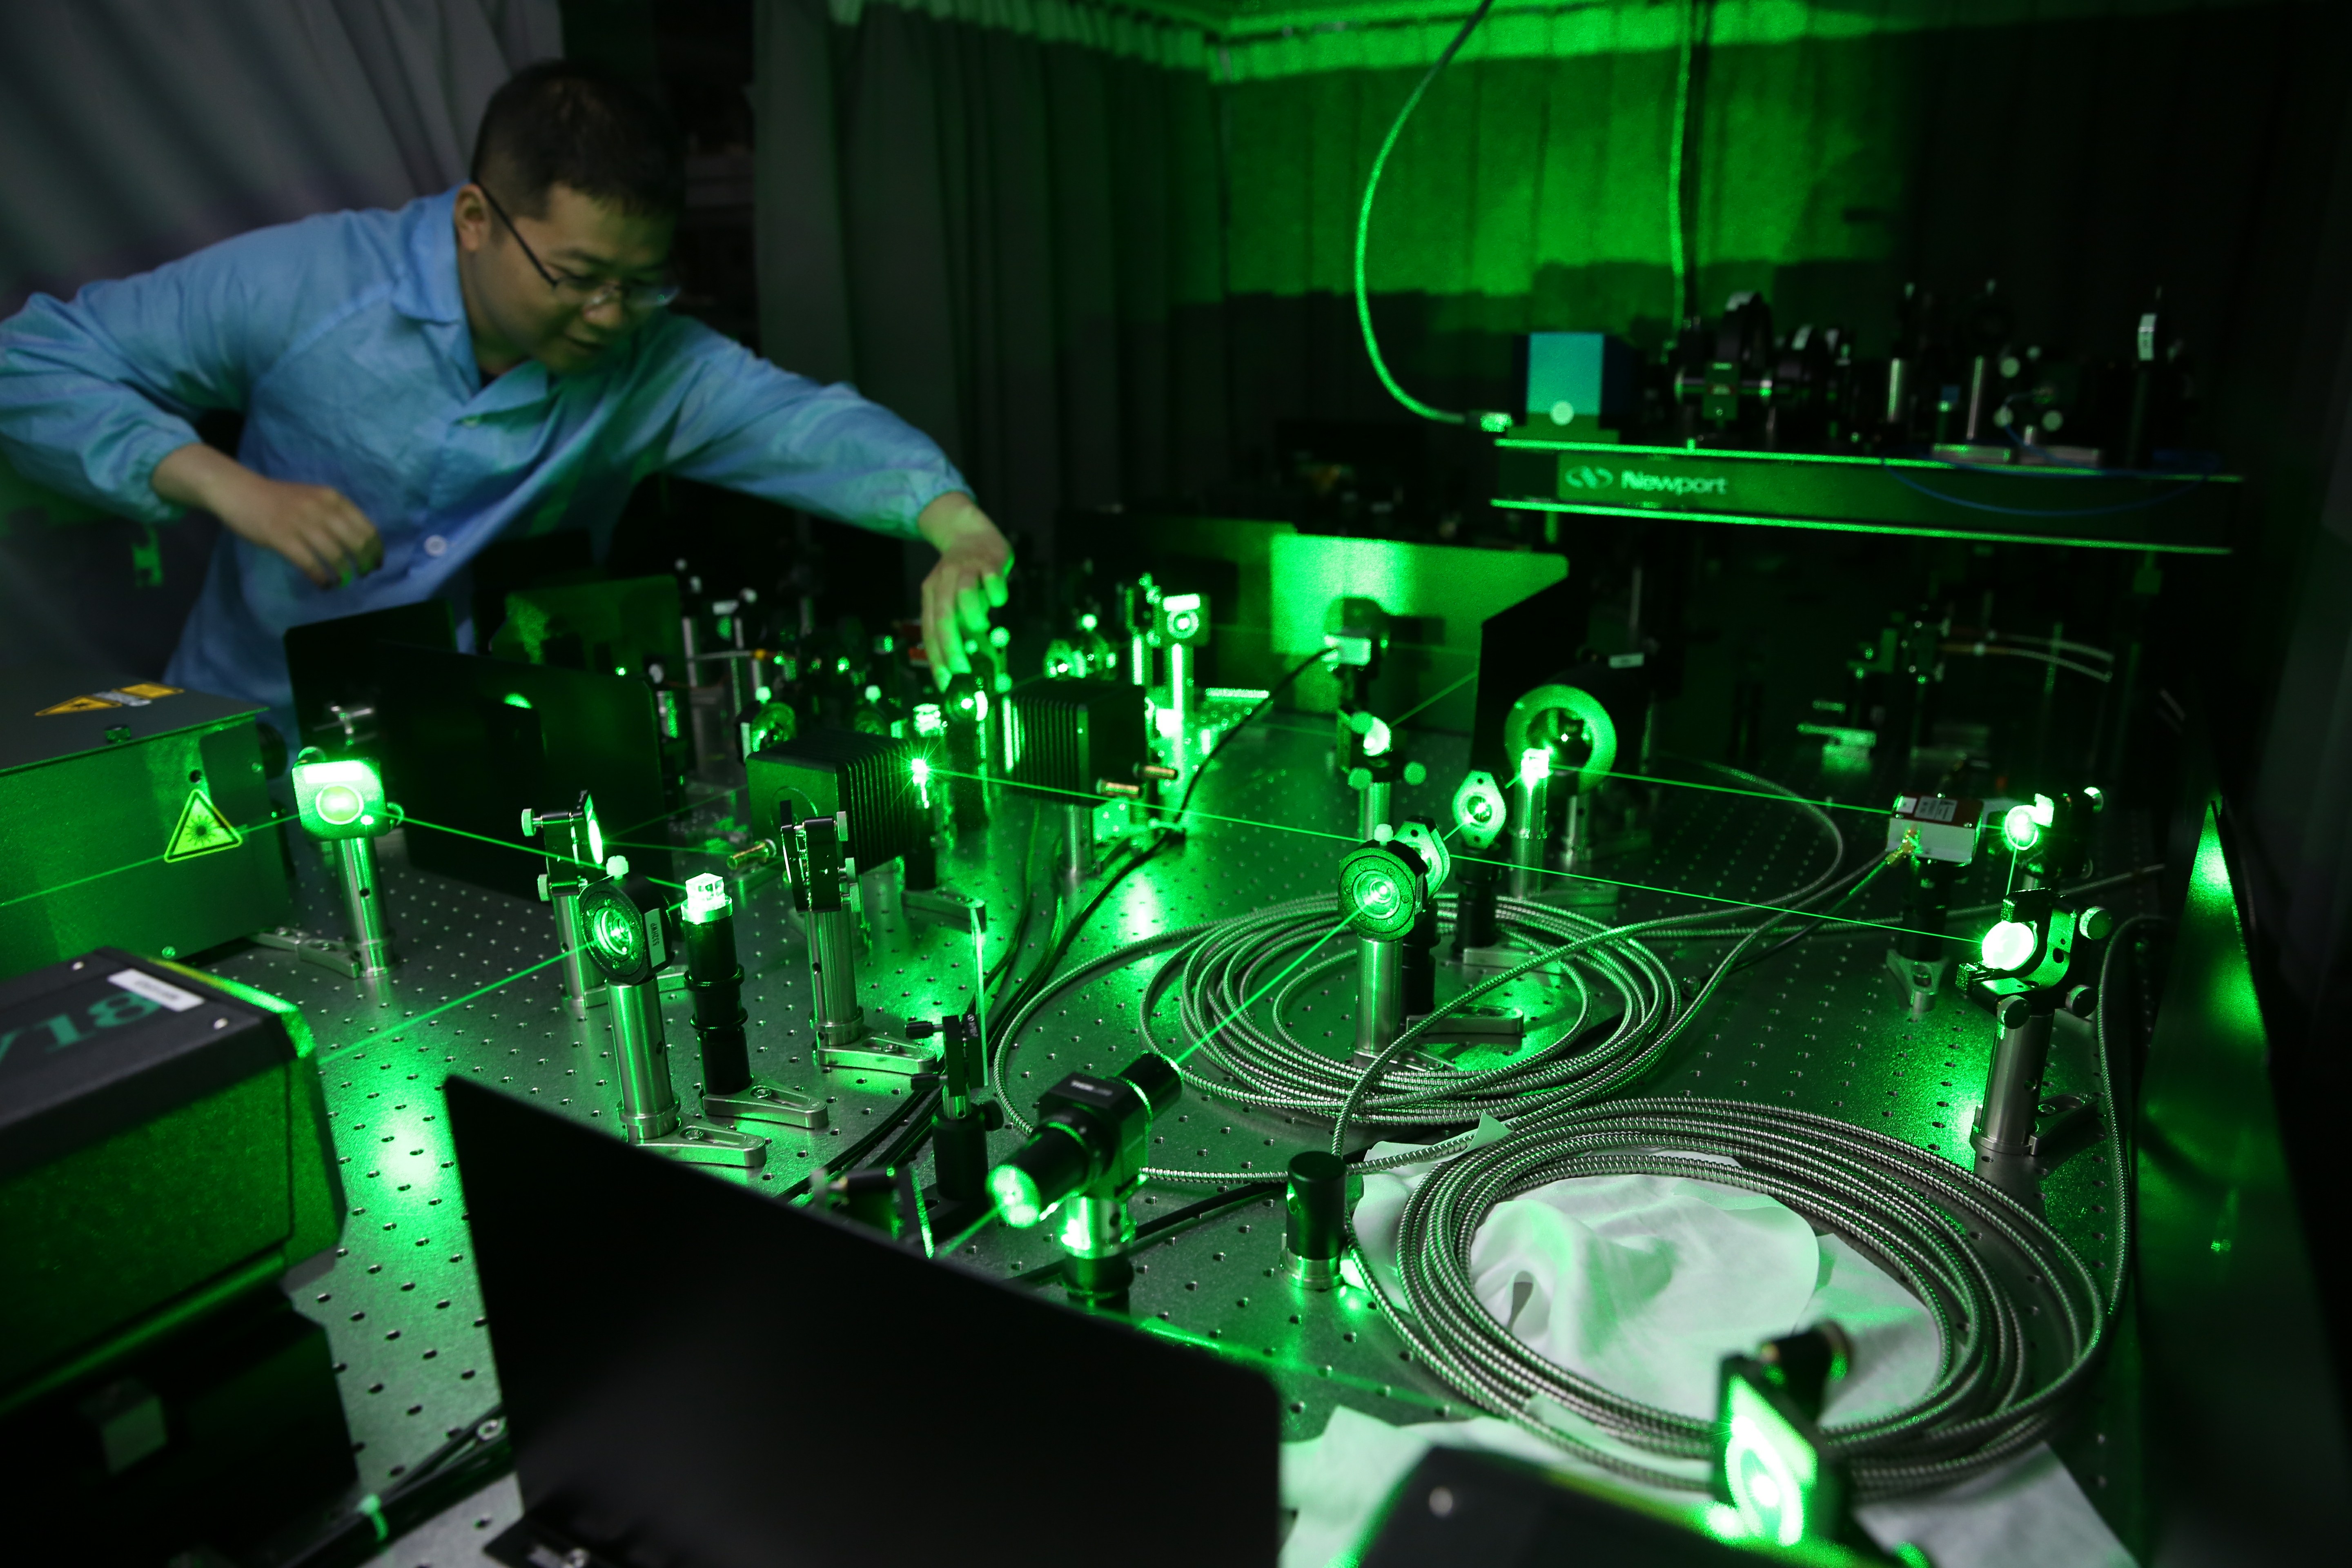 A Chinese researcher works on an ultracold atom device at the CAS-Alibaba Quantum Computing Laboratory in Shanghai, China, 30 July 2015.

Aliyun, the cloud-computing arm of Chinese e-commerce giant Alibaba Group Holding Ltd., is co-founding a quantum computing laboratory with the Chinese Academy of Sciences to help secure its data centers and develop a new type of computer. The formation of the CAS-Alibaba Quantum Computing Laboratory in Shanghai is similar to research initiatives by Microsoft Corp., Google Inc., International Business Machines Corp. and various government-backed scientific laboratories. Researchers are trying to find practical applications in computing and cryptography from the theoretically unique properties of subatomic particles. Quantum mechanics may lead to much faster calculations and almost impossible to break cryptography, its promoters argue.No Use China. No Use France.